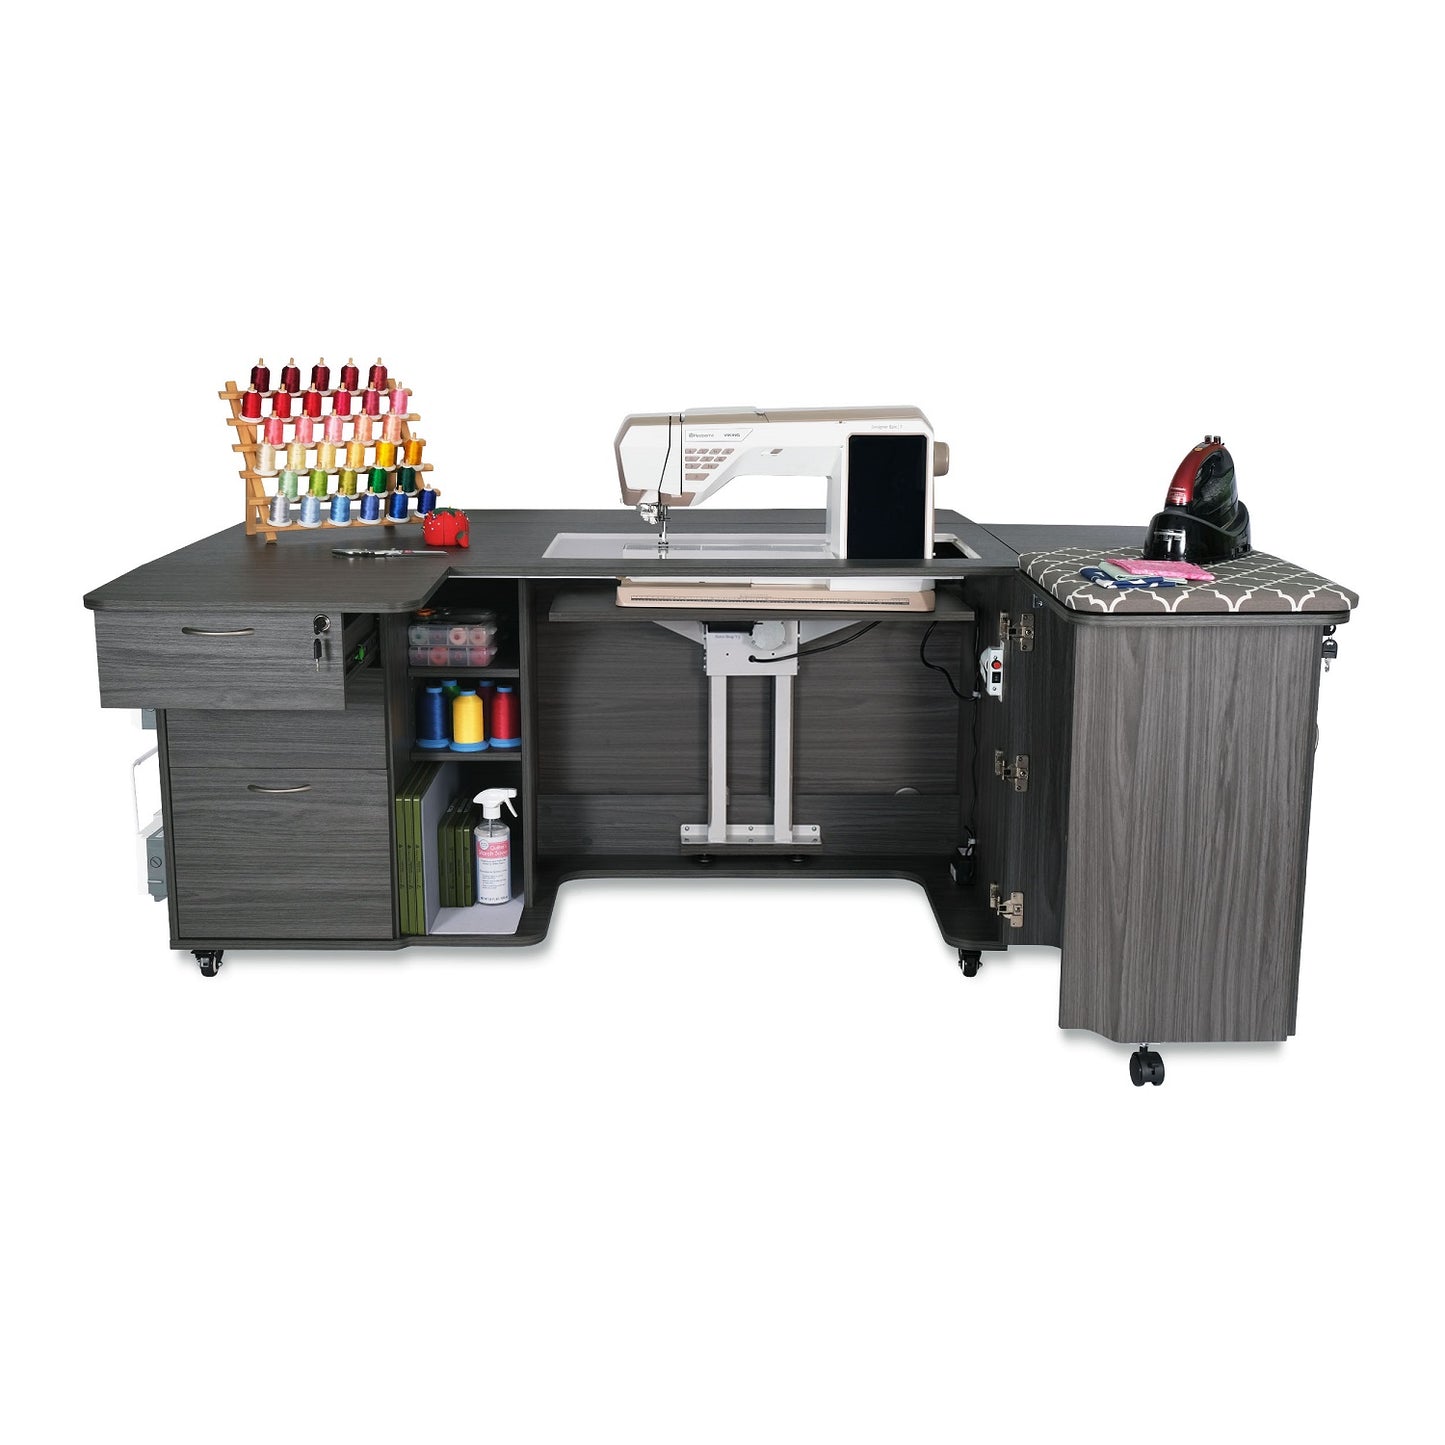 Kangaroo Sydney Sewing Cabinet with Electric Lift